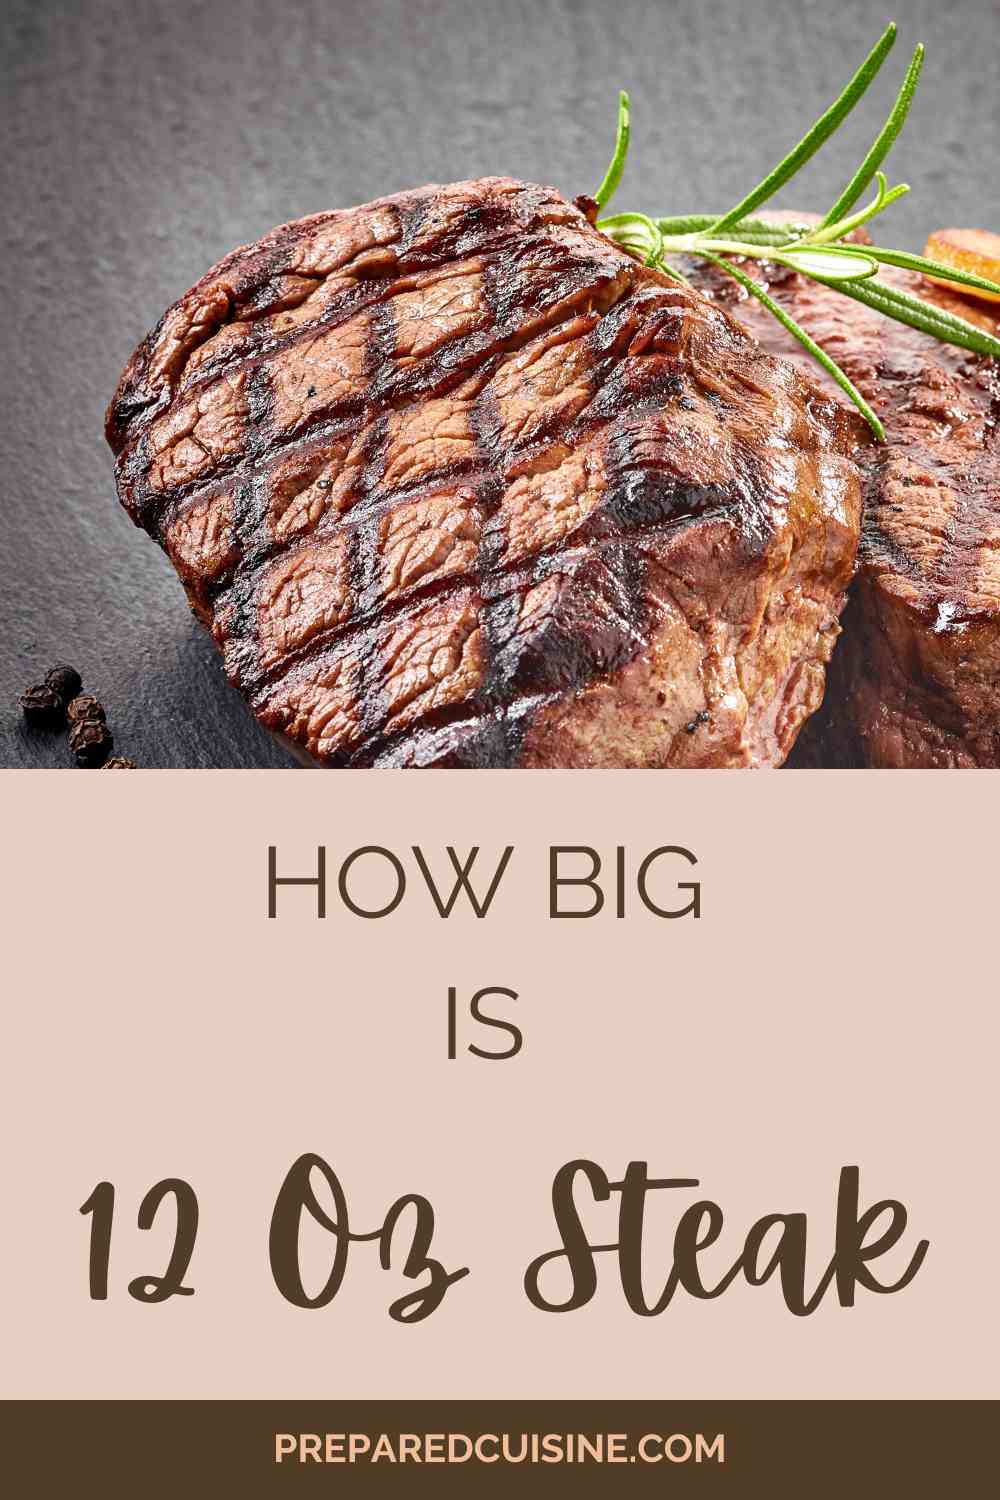 How Big and Thick Would a 12 Oz Steak